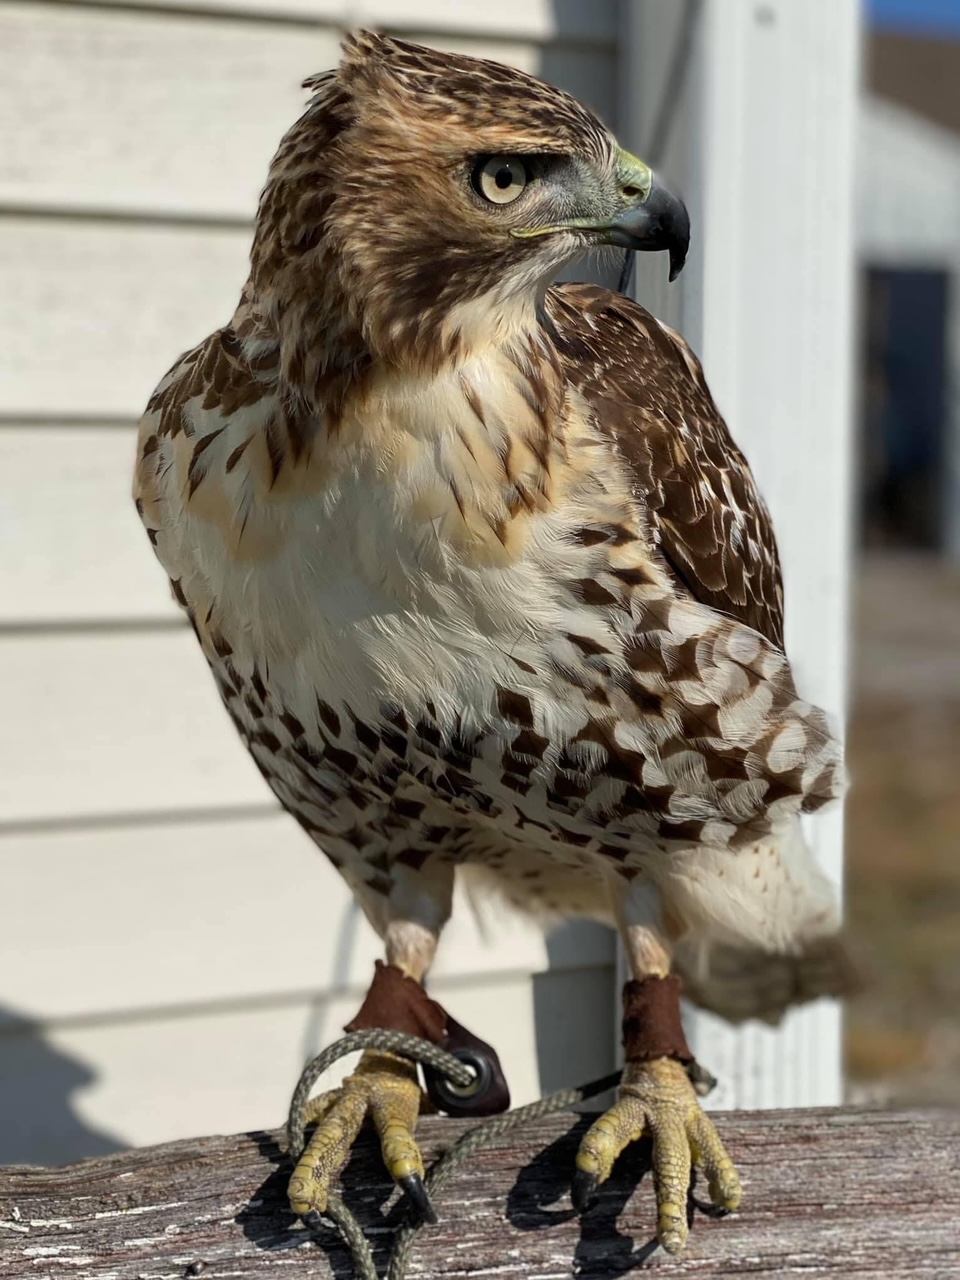 Then juvenile red tailed hawk Caprica in late fall 2020, one month into training.